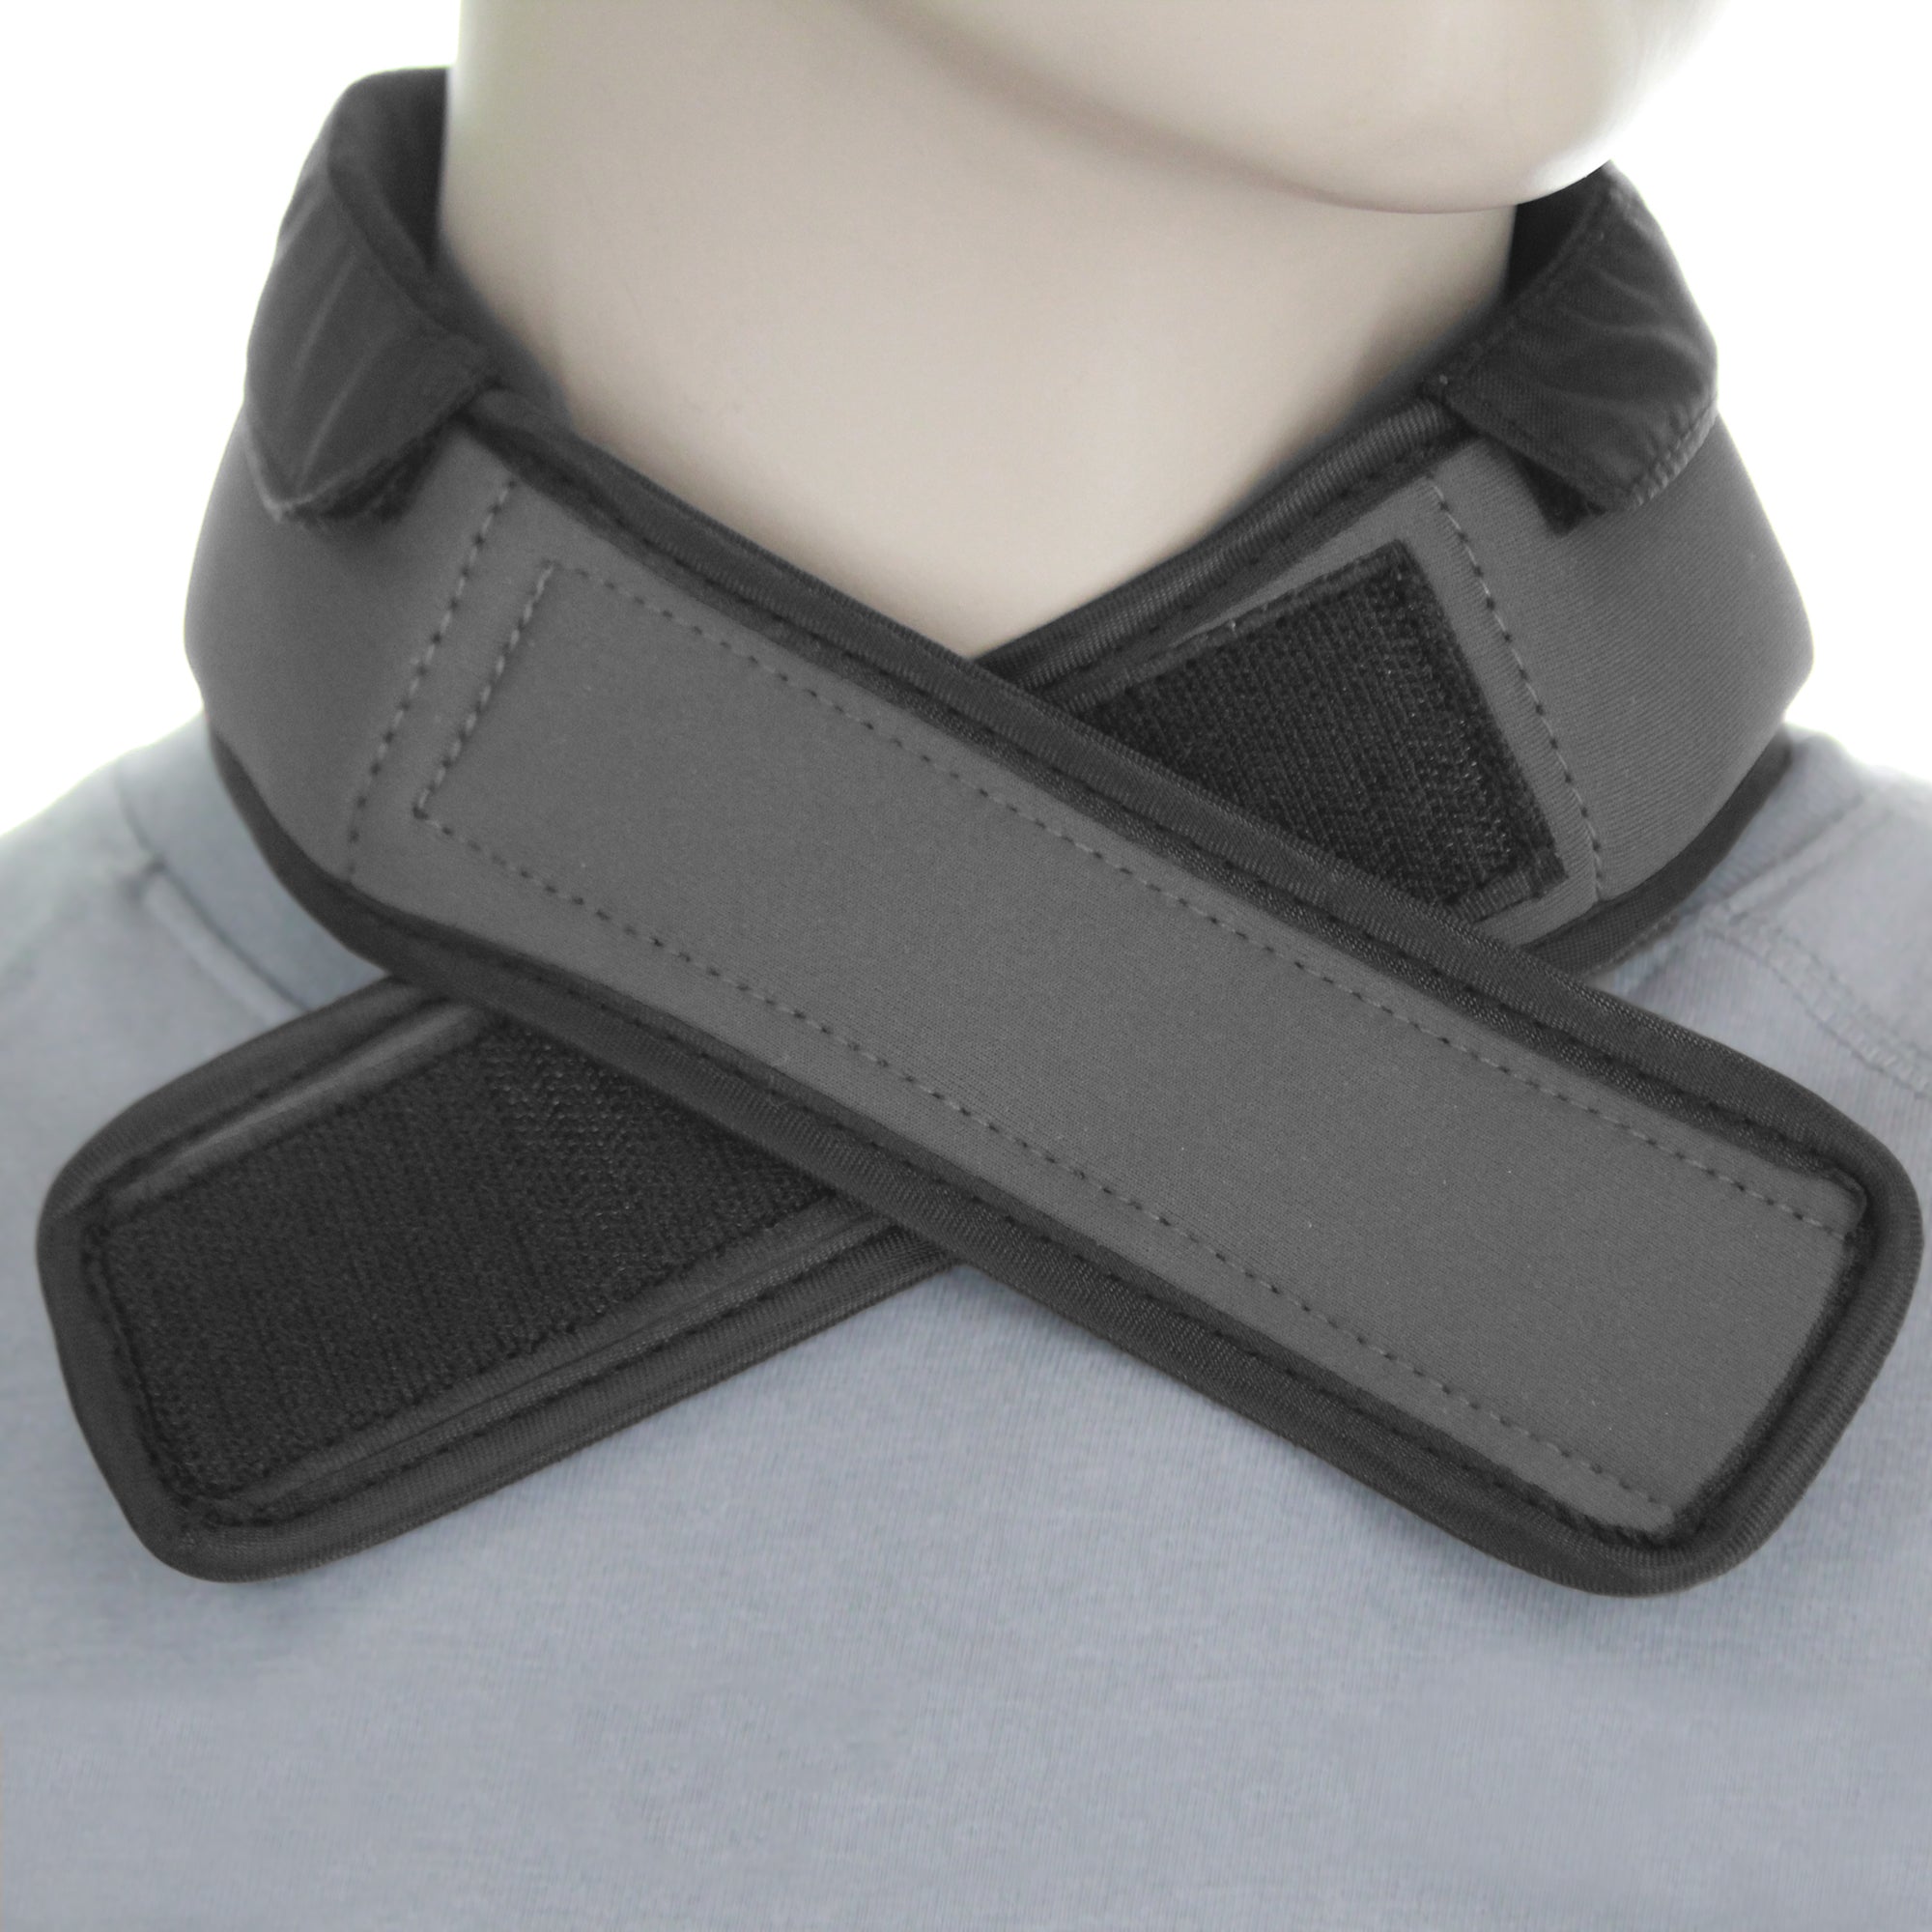 FlexiFreeze Cooling Collar, charcoal, on mannequin, close up